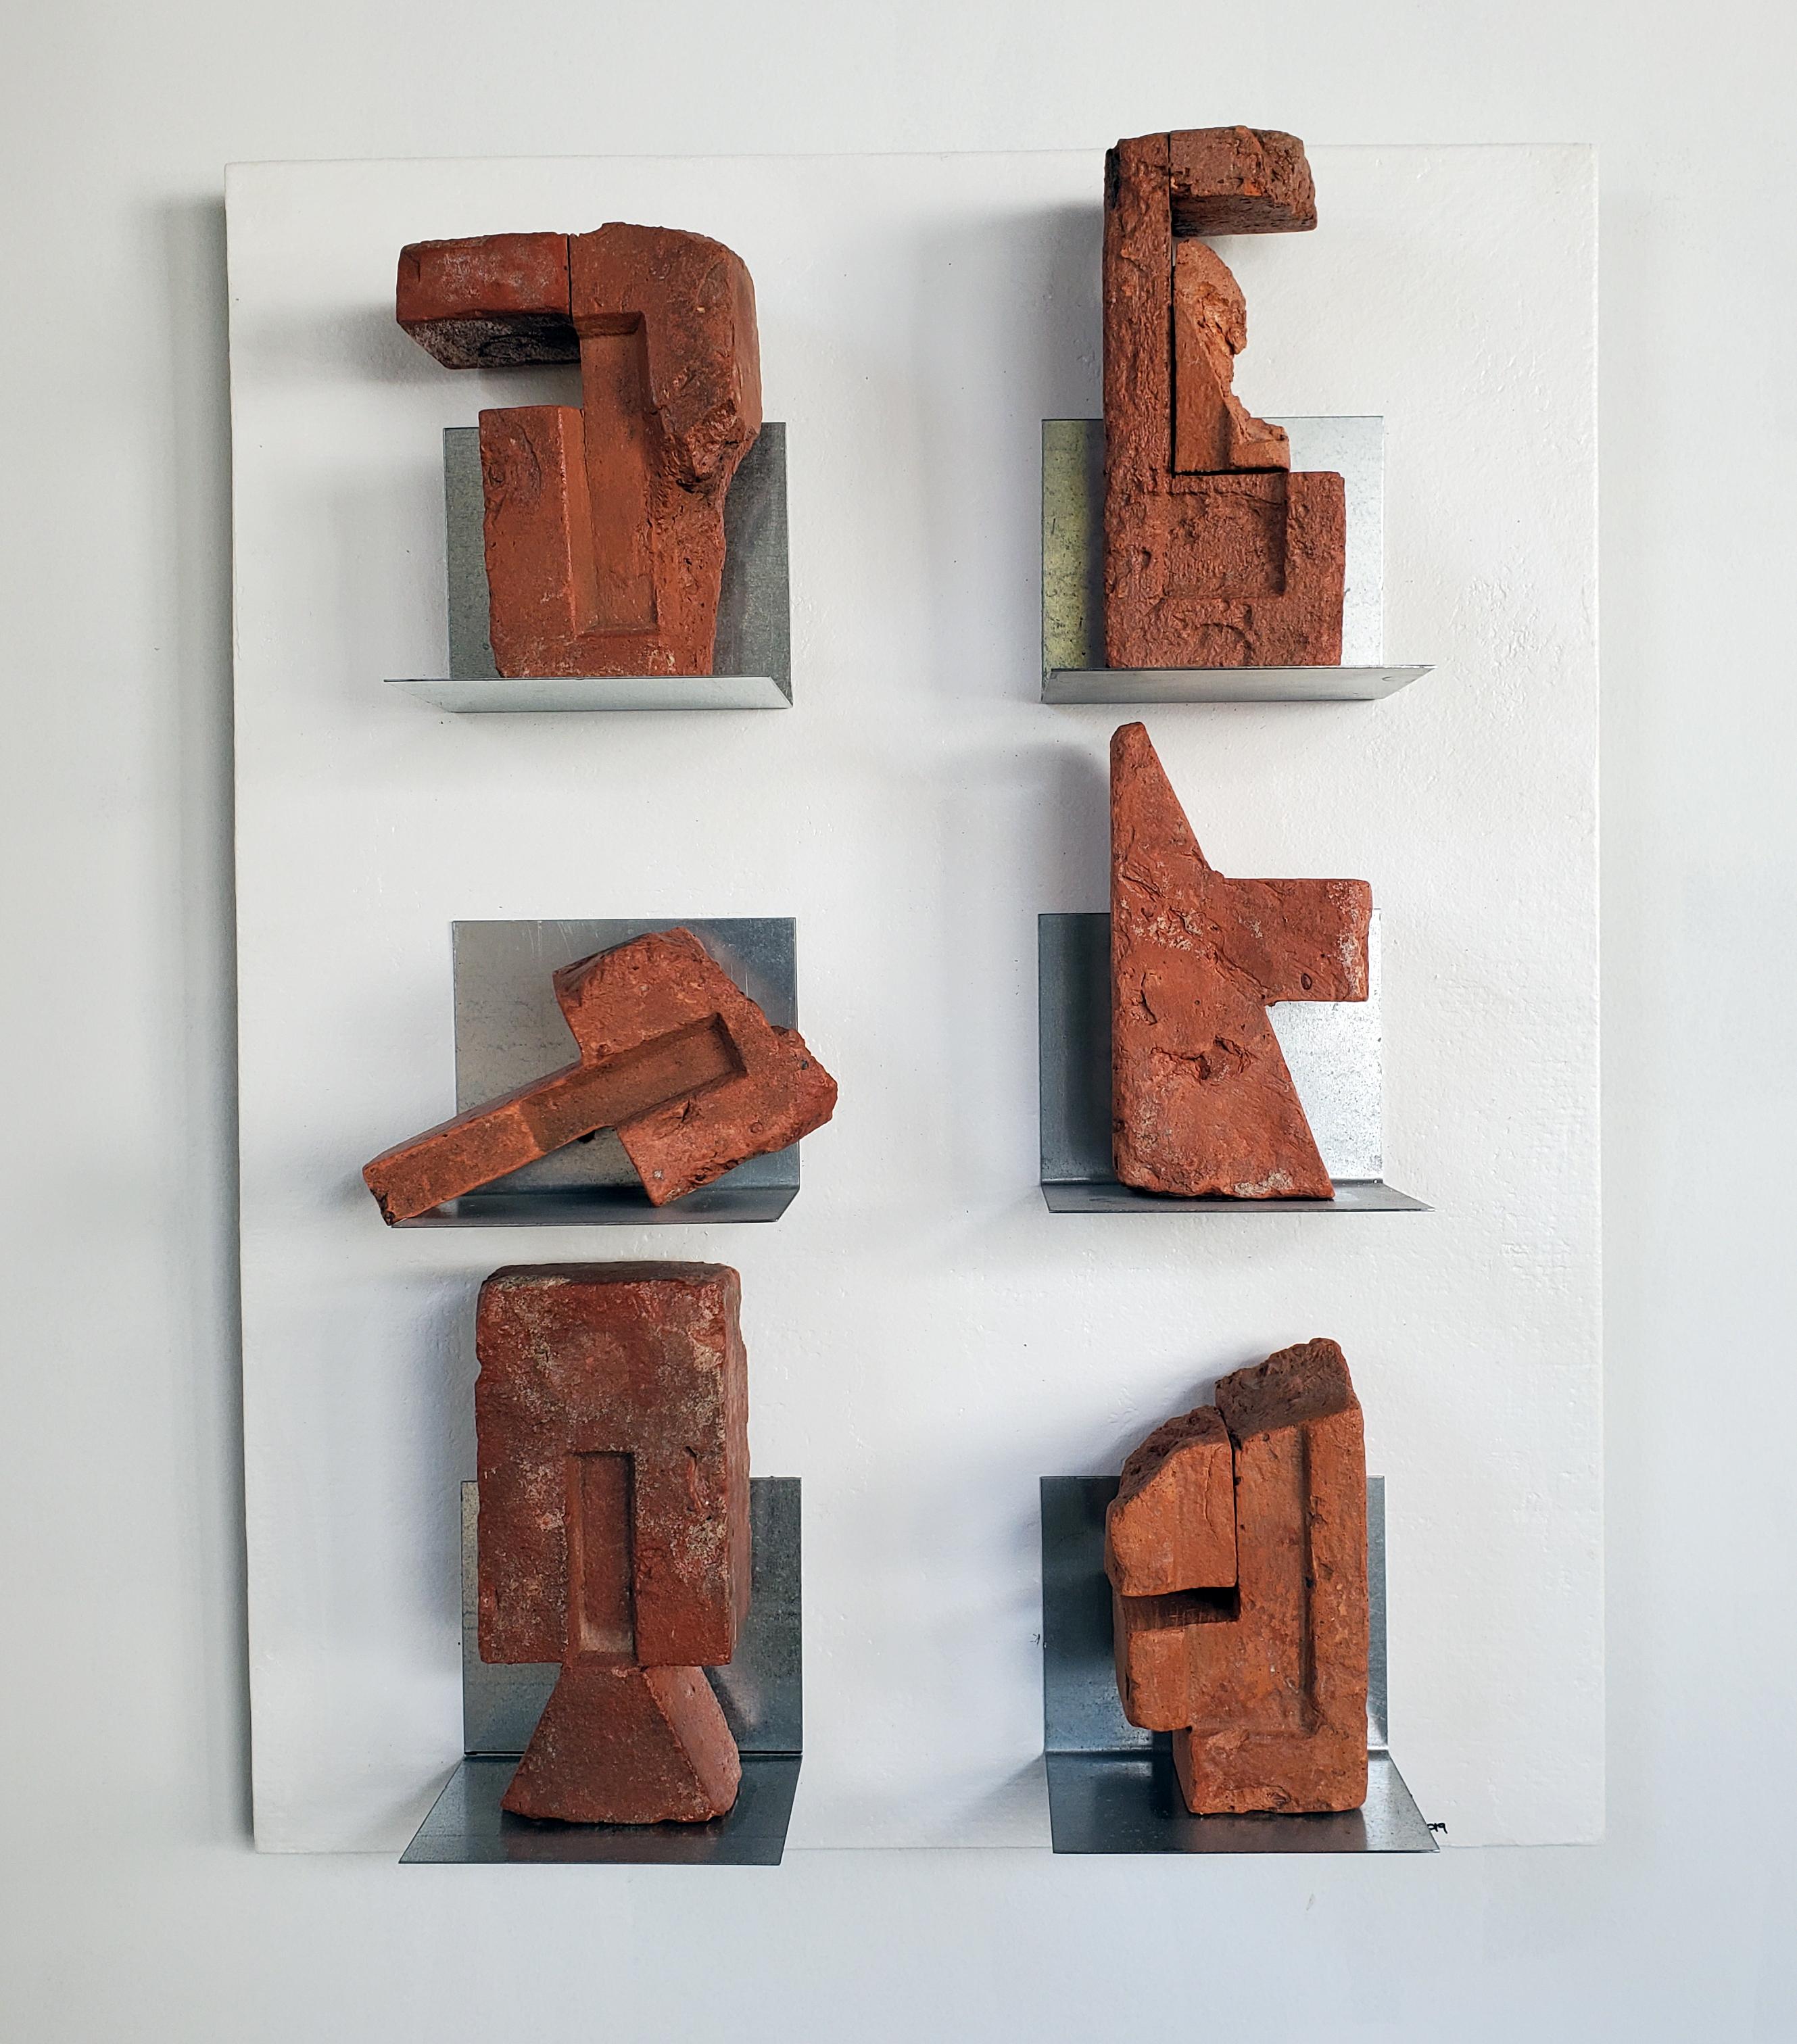 Compelling wall relief sculpture creates artistic puzzle, "Gallery of Misfits"